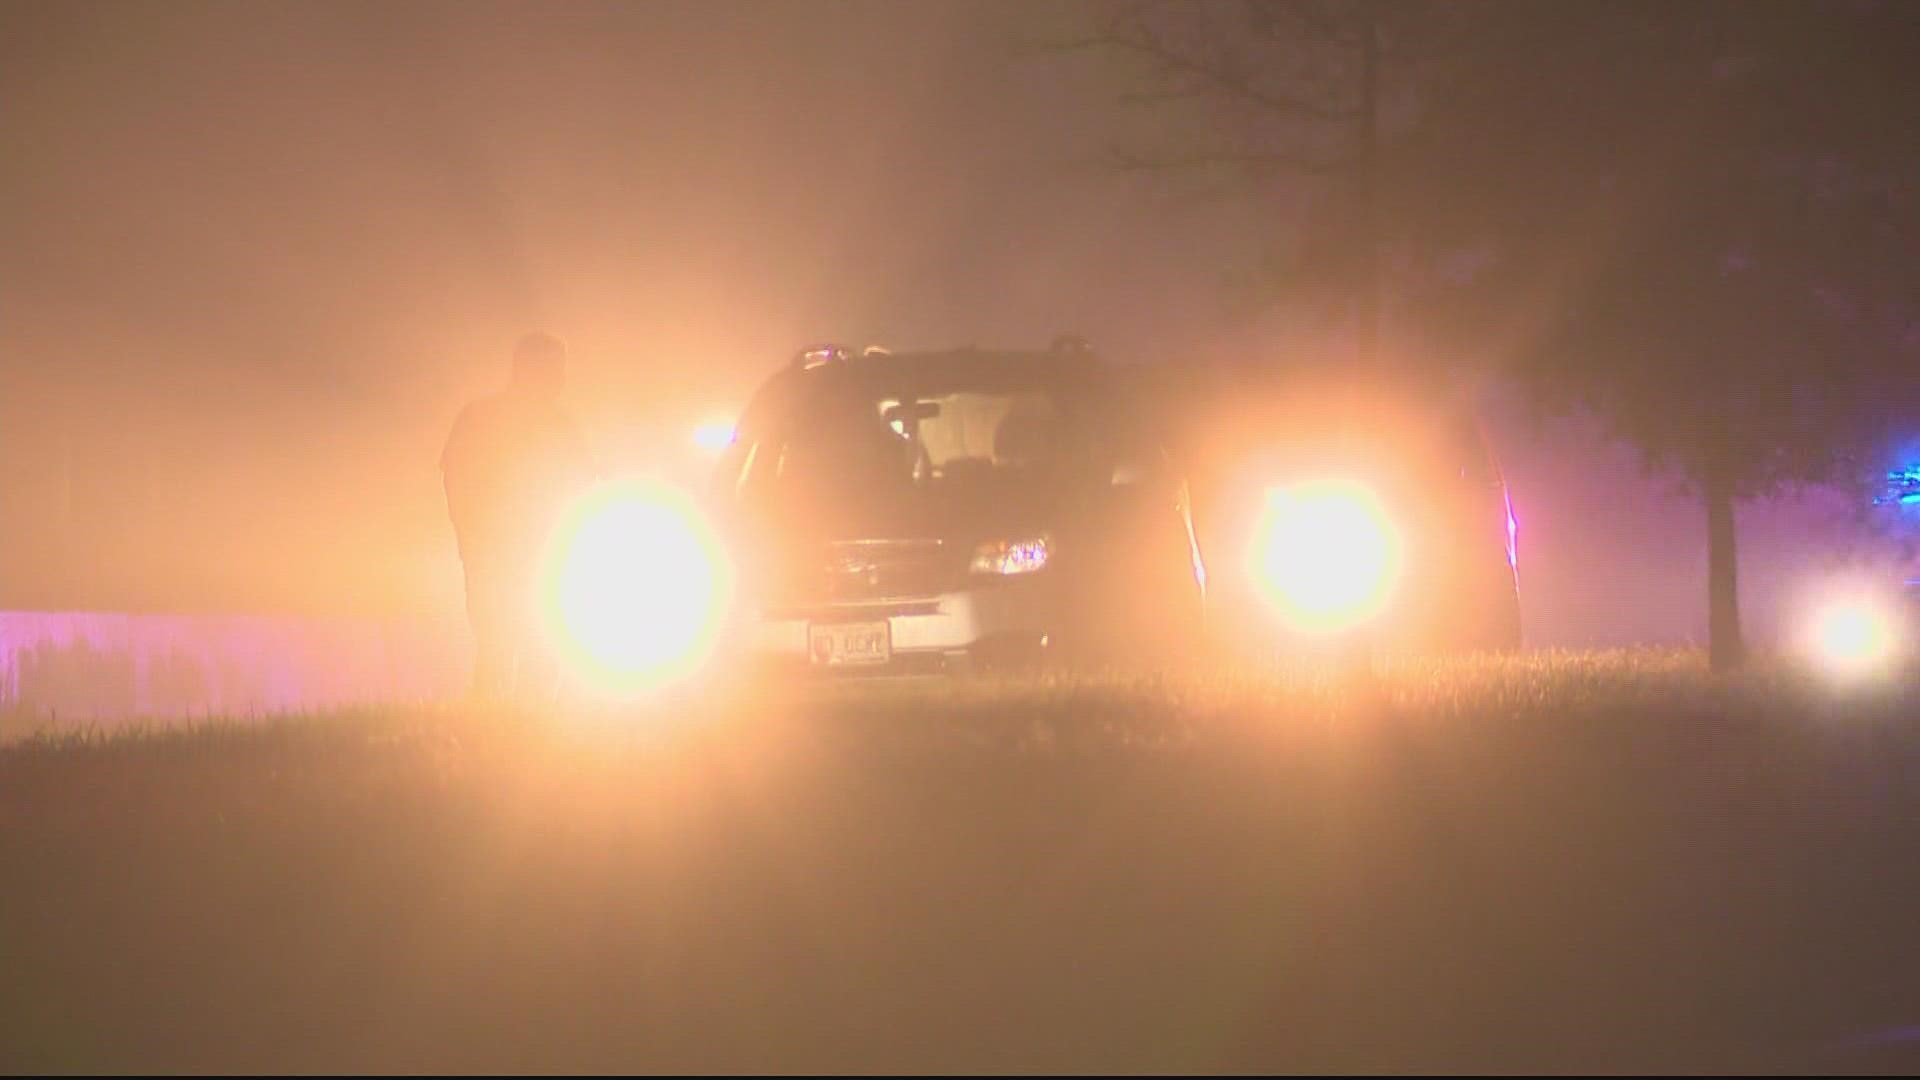 A man is dead after a hit-and-run crash just after midnight Tuesday in Prince George's County.